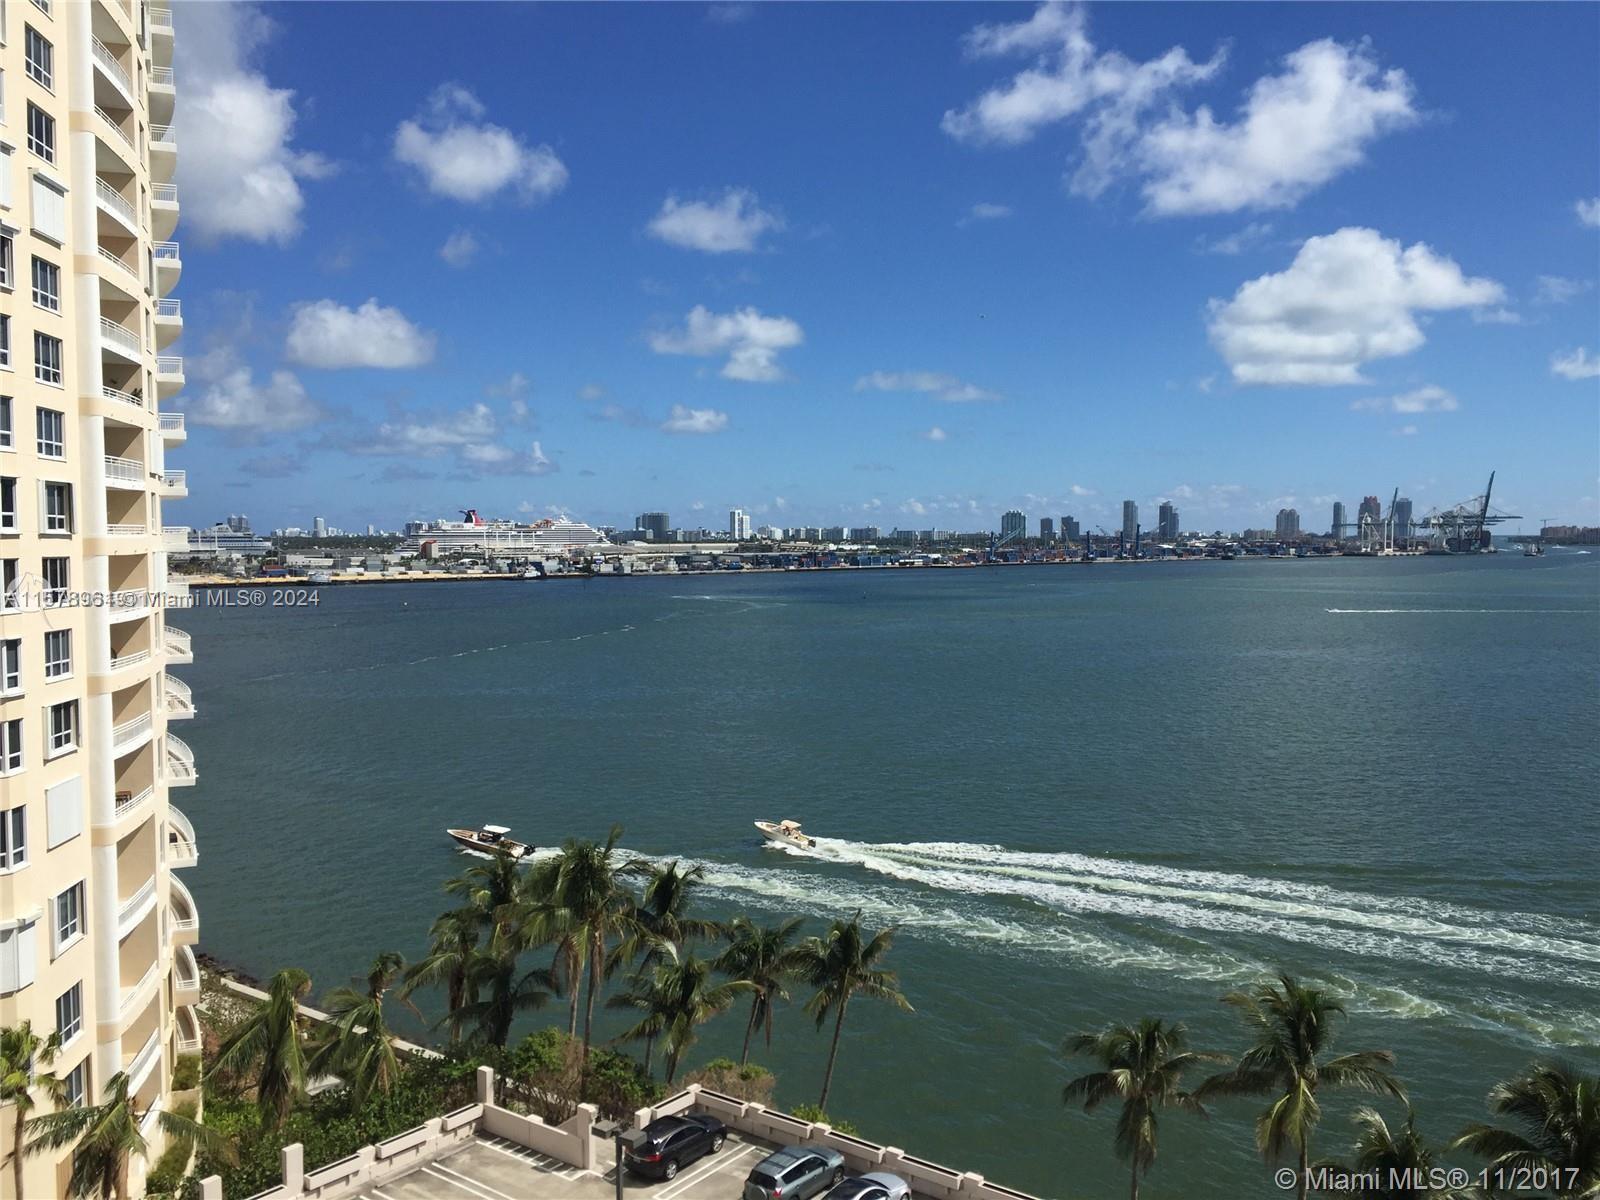 Bright 1/1.5 apartment in Brickell Key with views of the bay, the port of Miami. Unit has washer dryer inside. Building has new elevators, and lots of amenities, salt water pool. Sauna, tennis, gym, valet, security, convenience store. No pets.